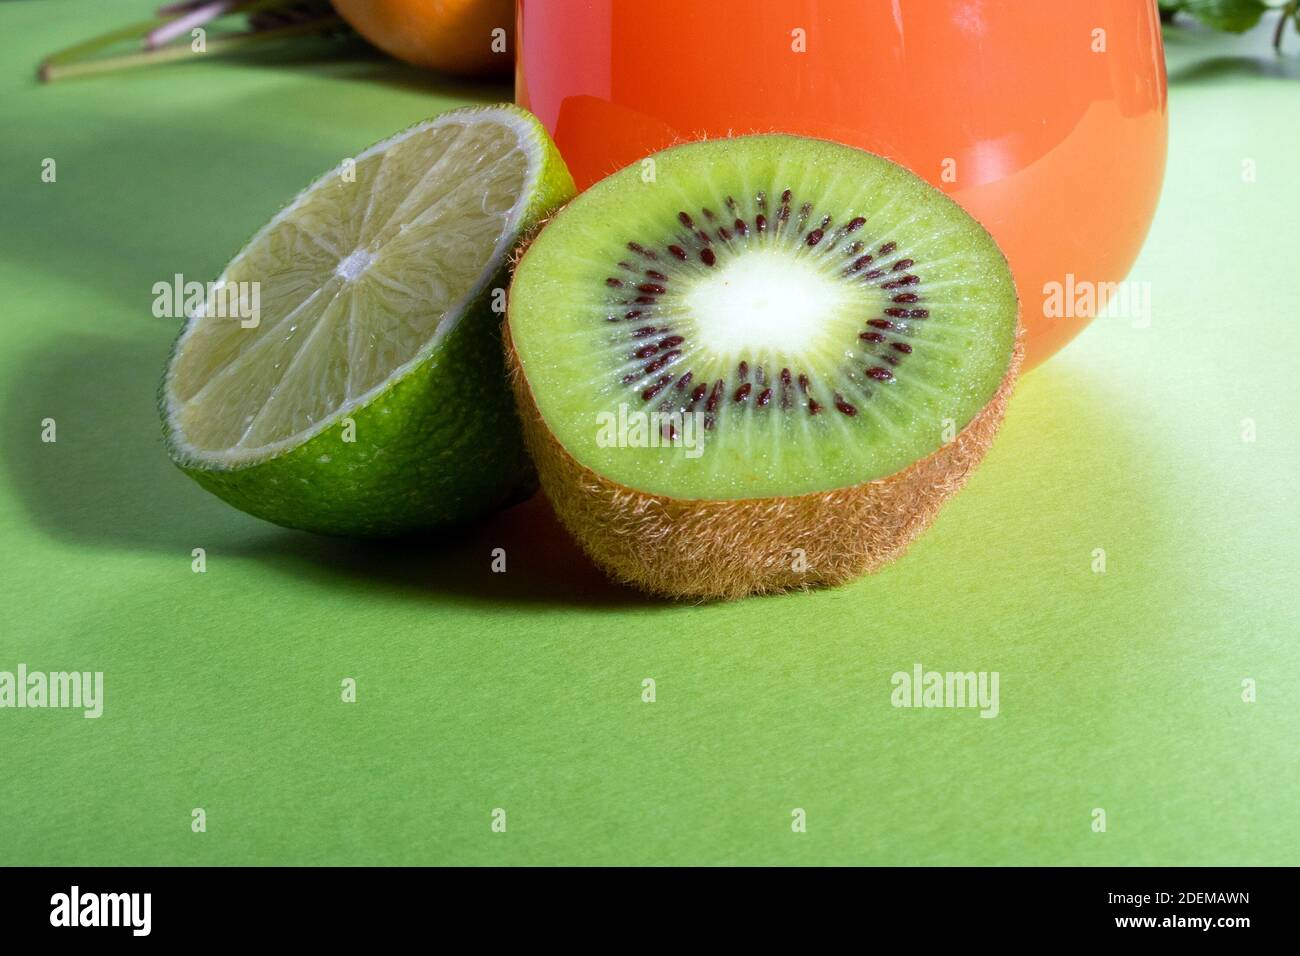 Composition of glasses with orange juice, lime, kiwi and verdure on a light green background Stock Photo